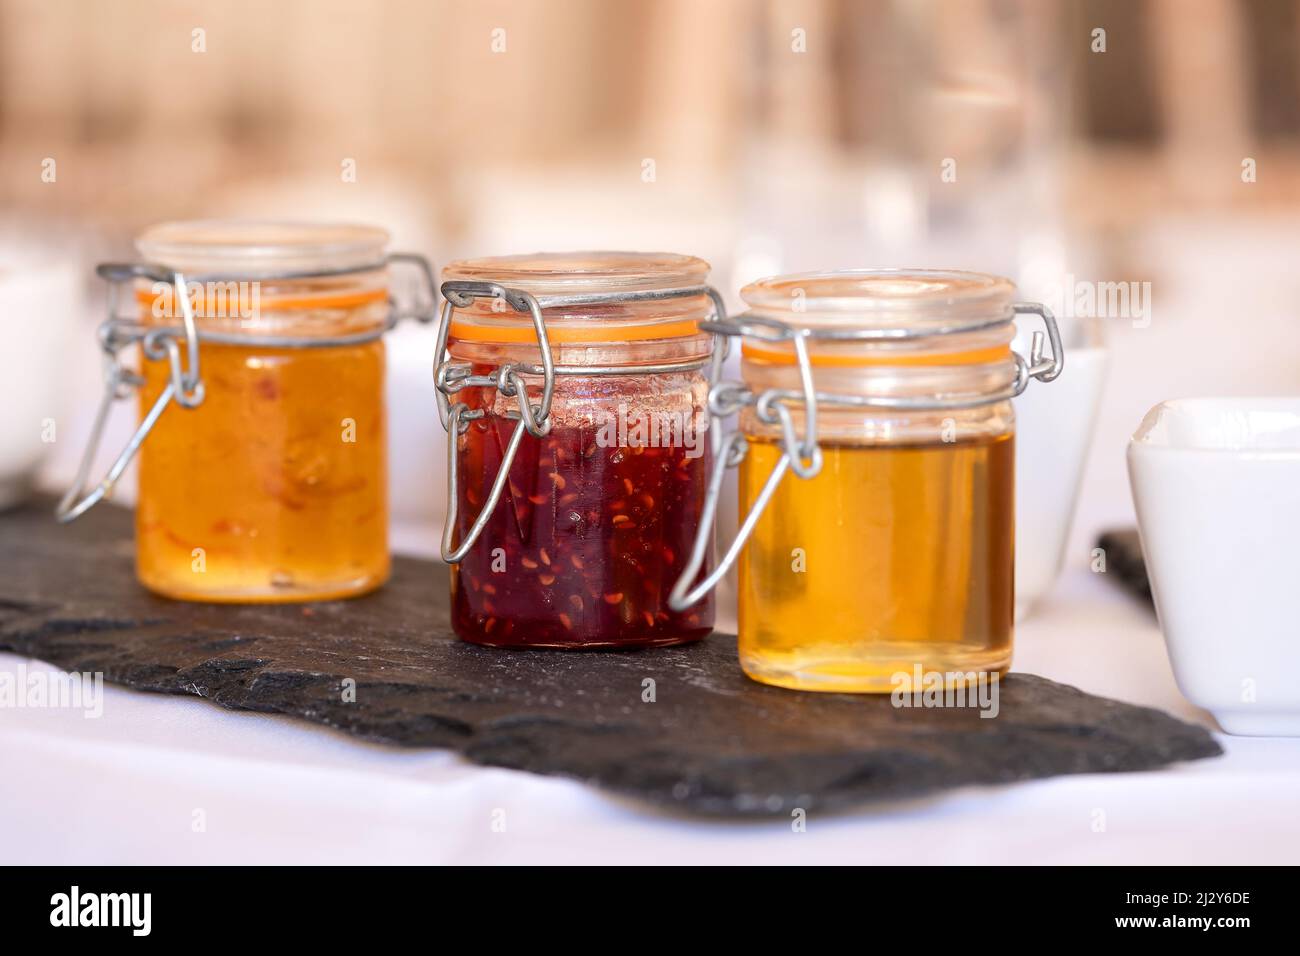 Three pots of conserves for toast or croissants in small glass jars on a breakfast table. The jars contain honey, marmalade and strawberry jam. Stock Photo